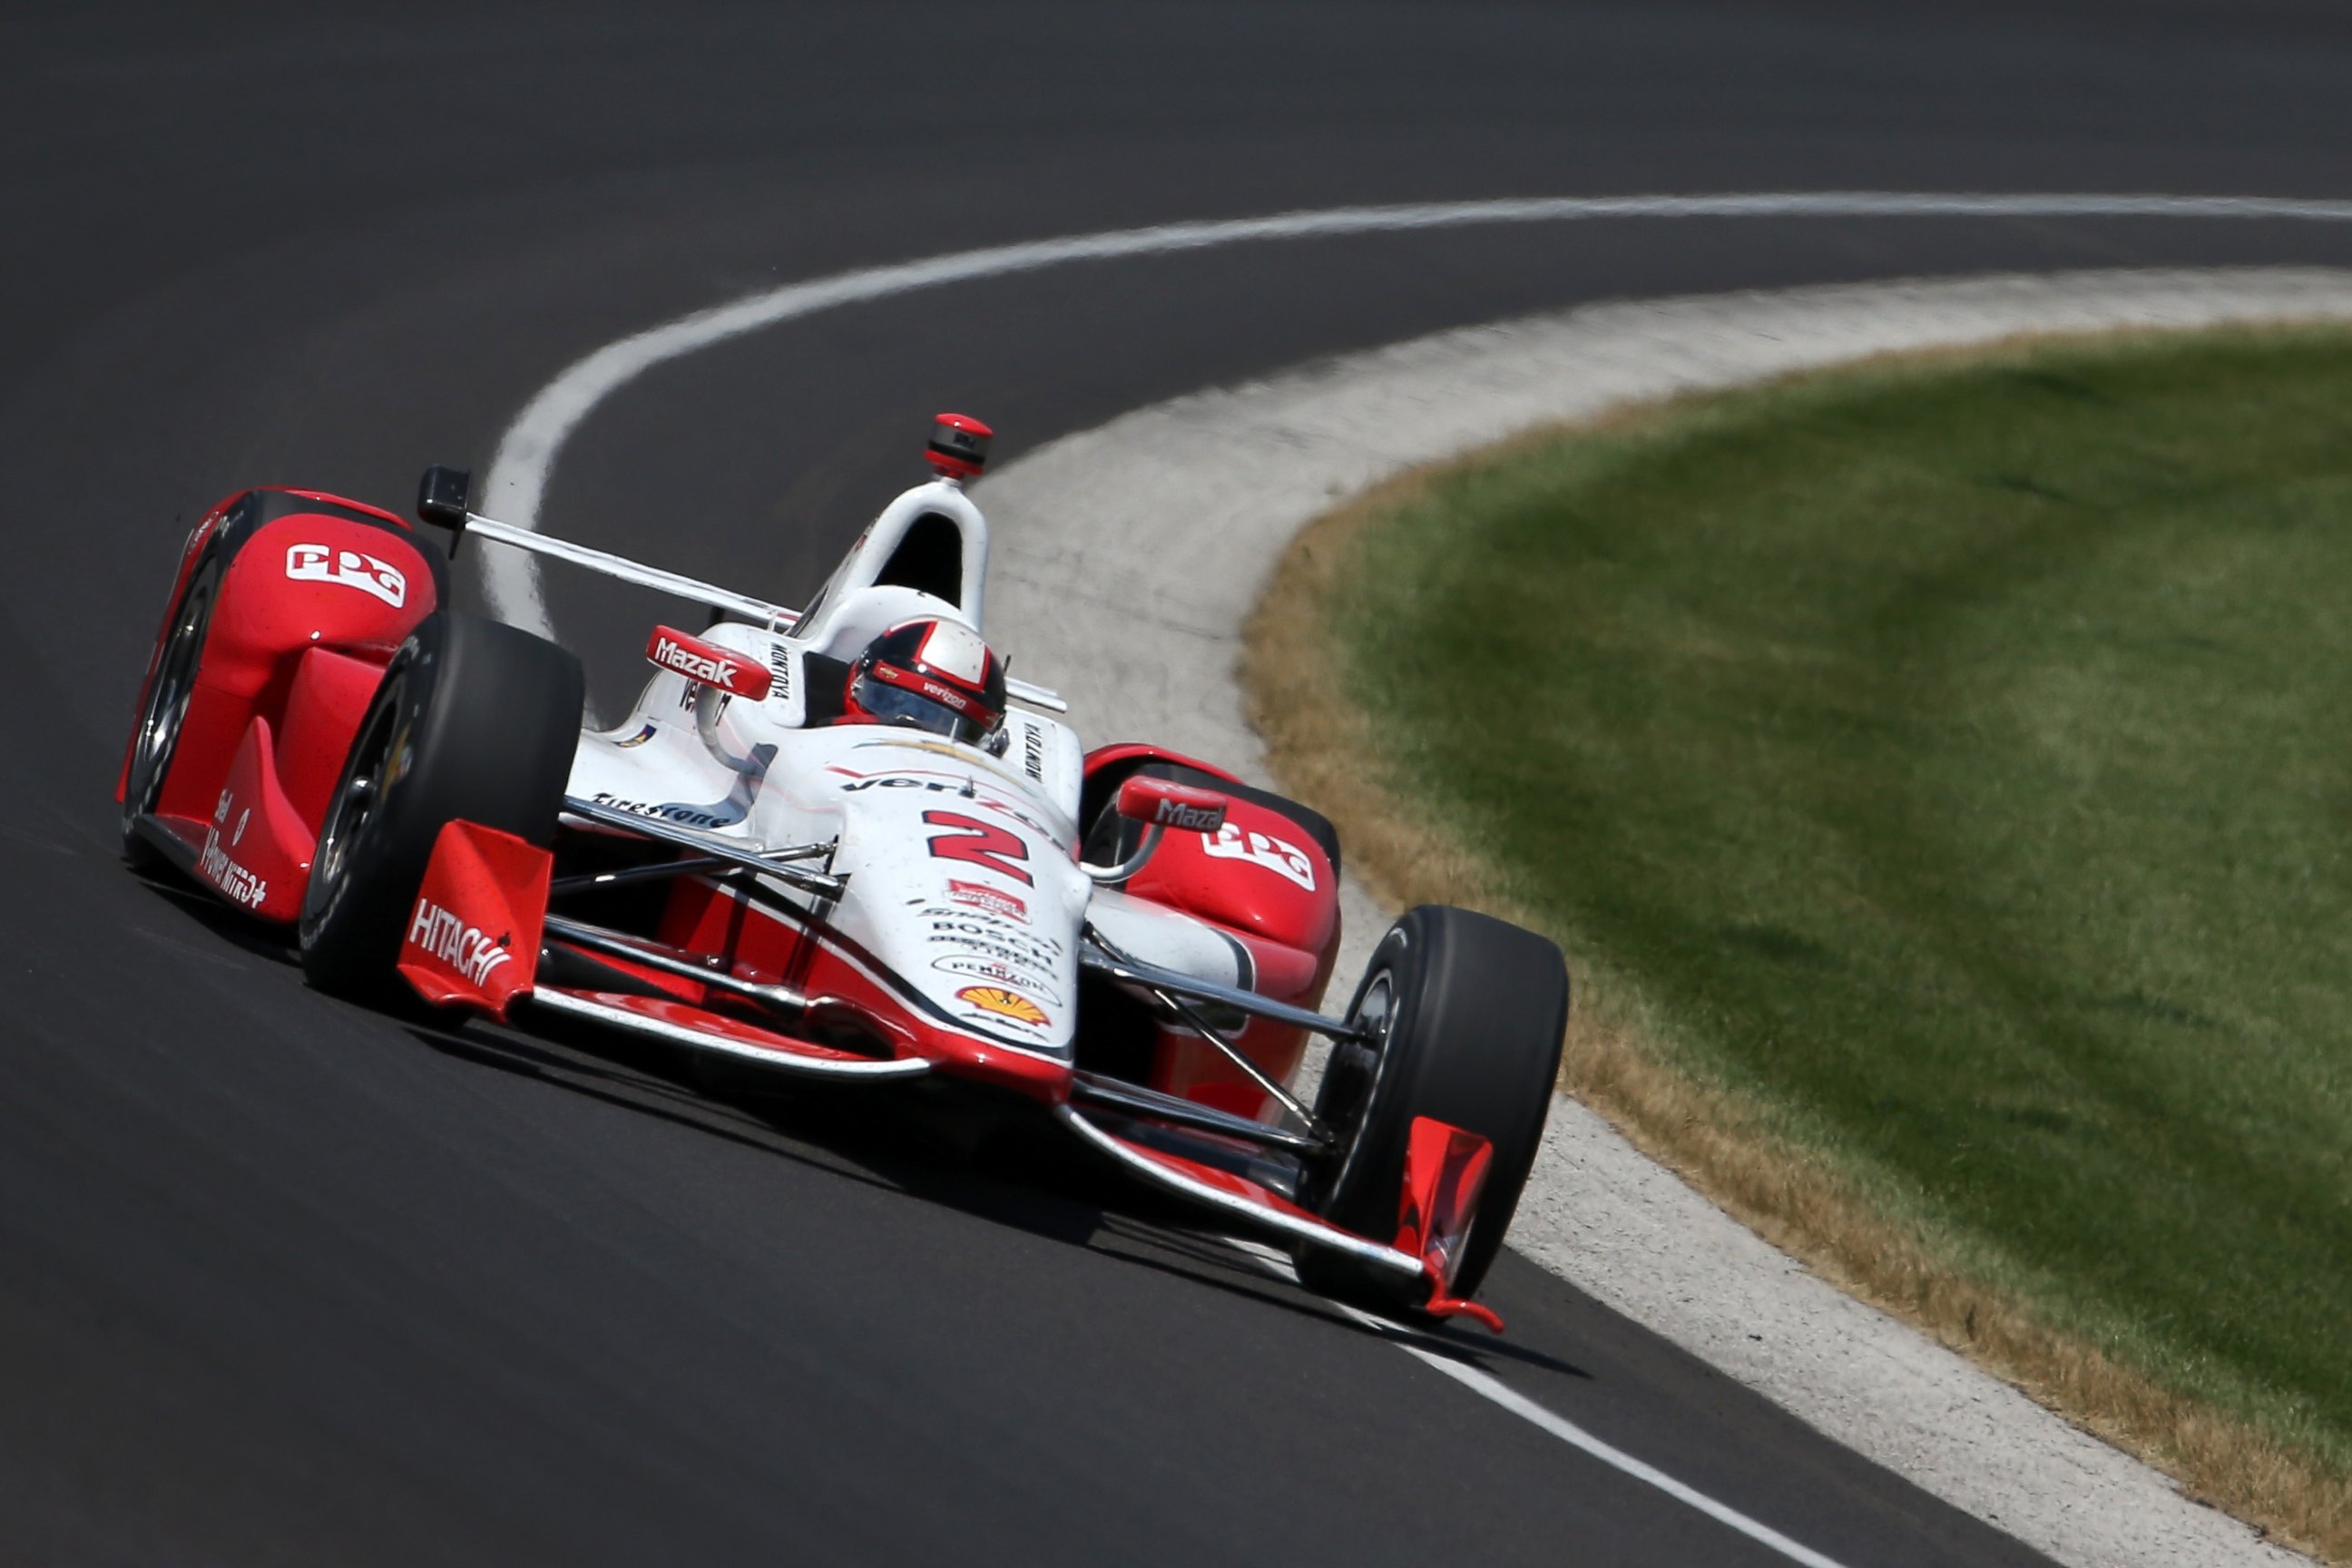 PHOTO: Juan Pablo Montoya of Colombia driver of the #2 Team Penske Chevrolet Dallara drives during the 99th running of the Indianapolis 500 mile race at Indianapolis Motorspeedway on May 24, 2015 in Indianapolis, Indiana. 